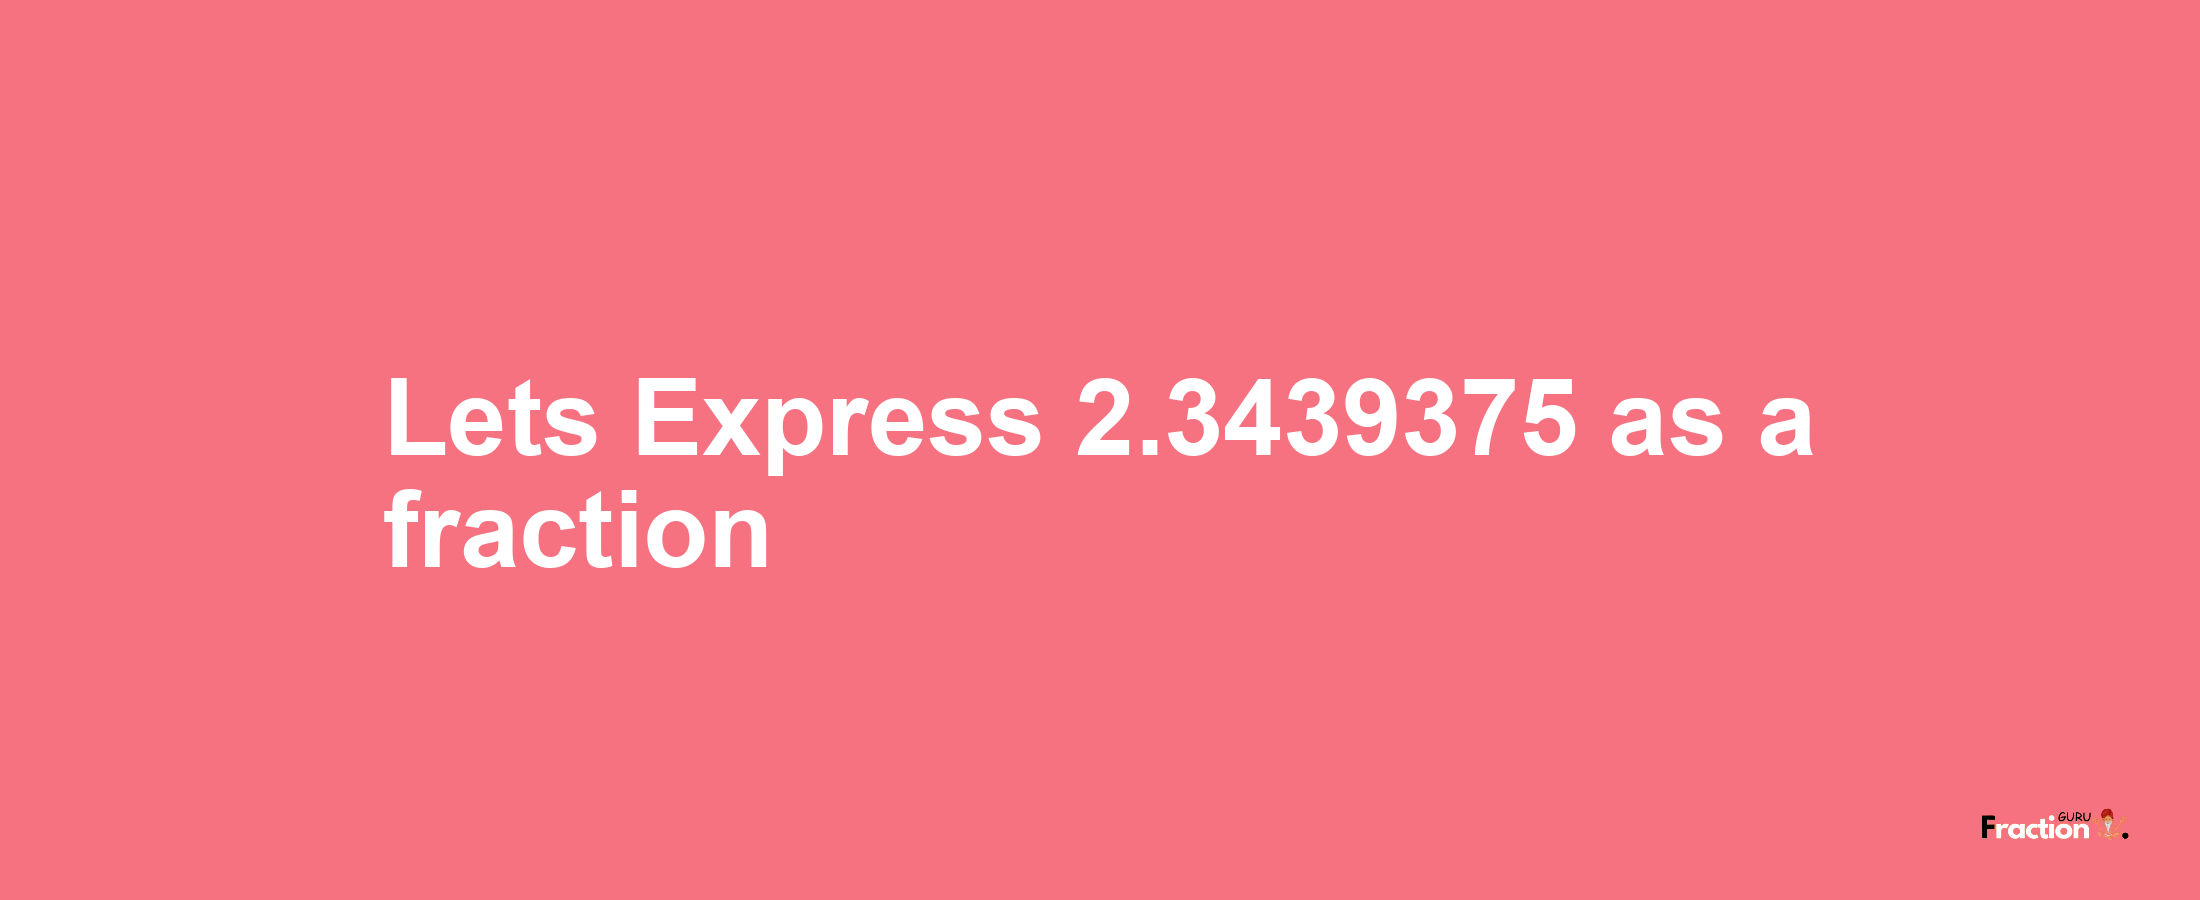 Lets Express 2.3439375 as afraction